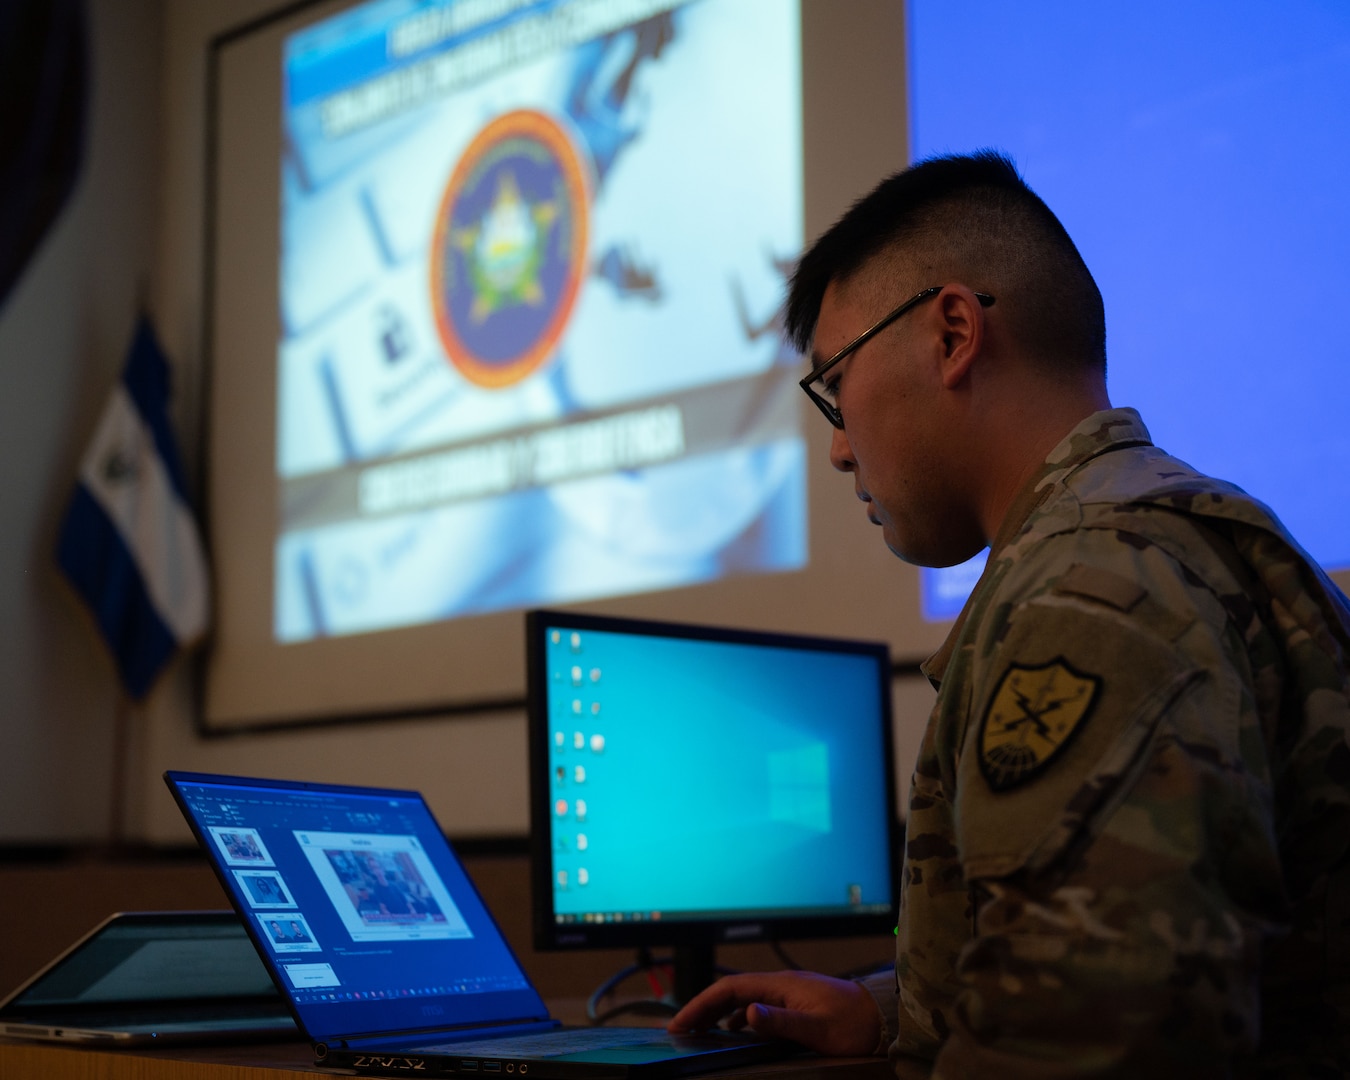 Sgt. Adam Dorian Wong, a threat researcher with 136th Cybersecurity Unit, presents new topics of interest including artificial intelligence and vulnerability identification to the Salvadoran cybersecurity unit in San Salvador, El Salvador, Dec. 7, 2022. The new material was targeted toward the Salvadoran team’s goals and vision.